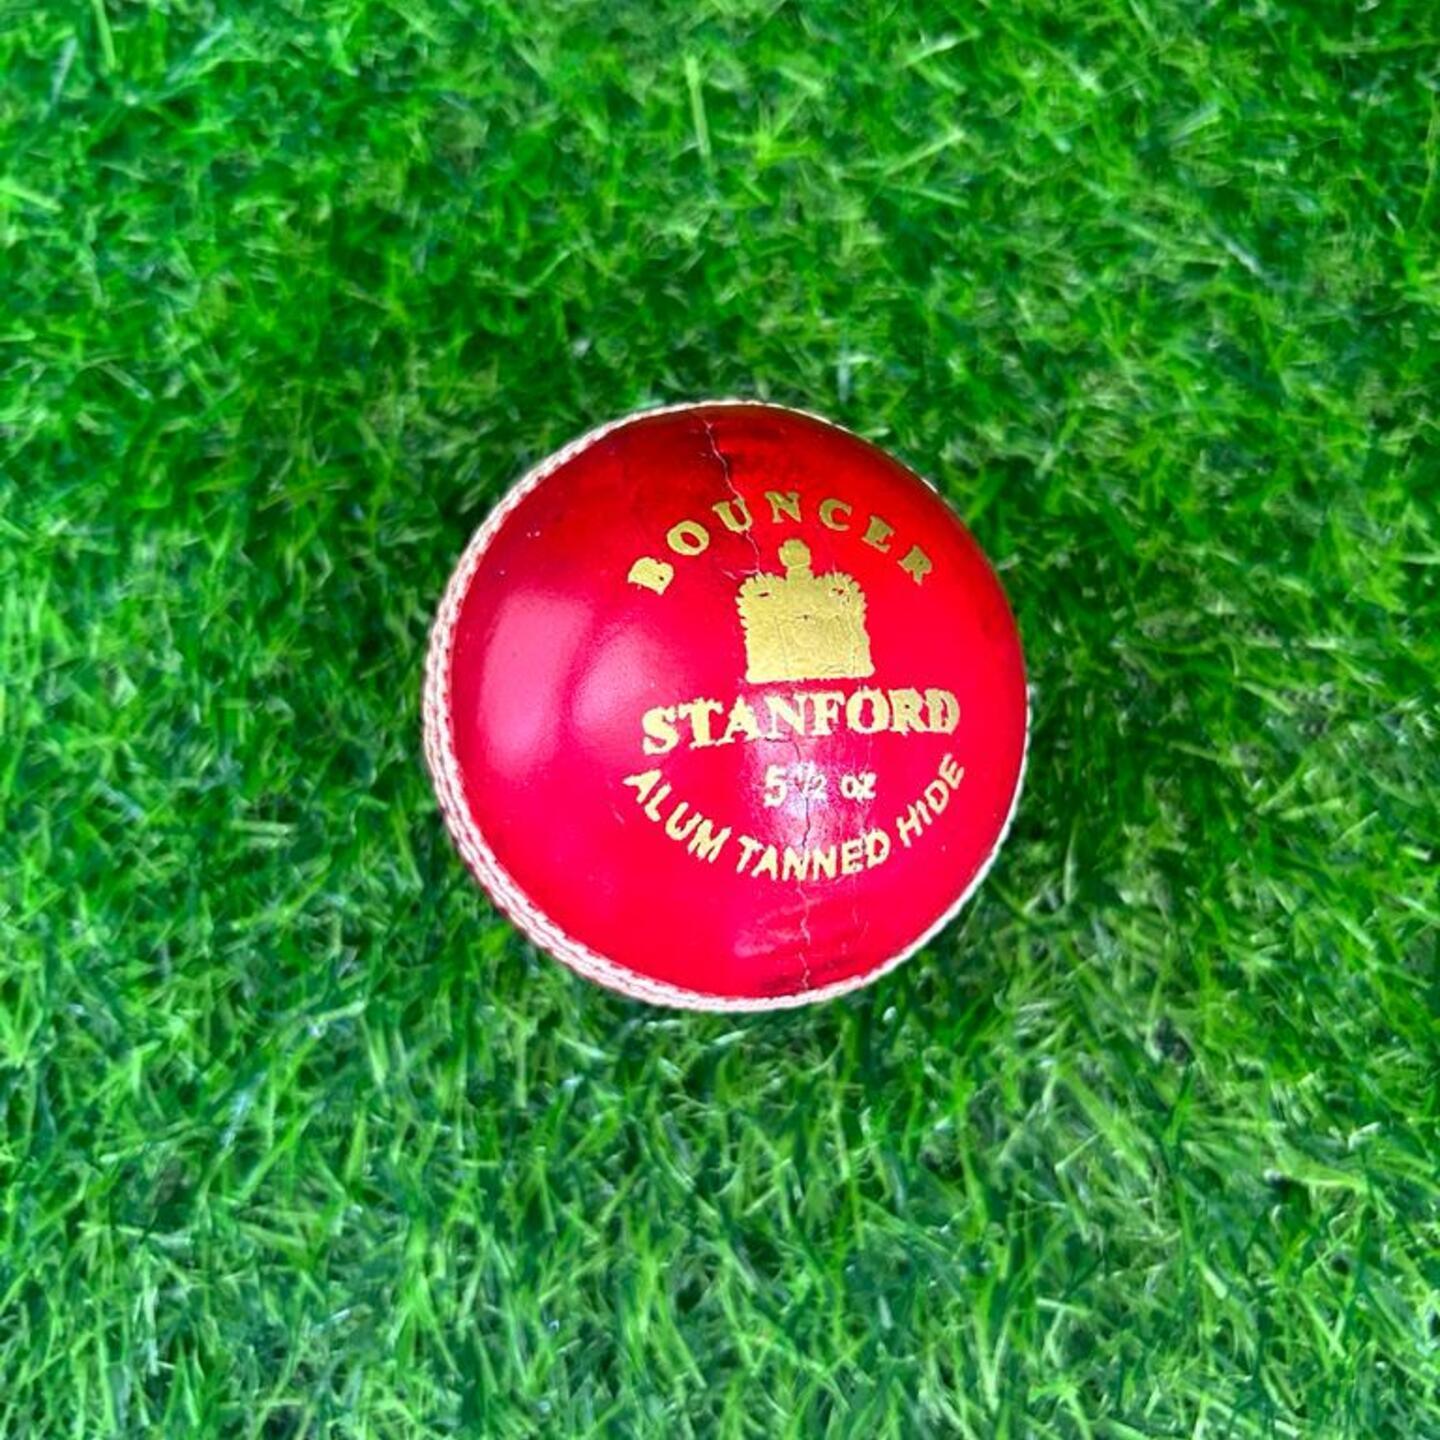 SF BOUNCER LEATHER CRICKET BALL  4 PC. RED BALL